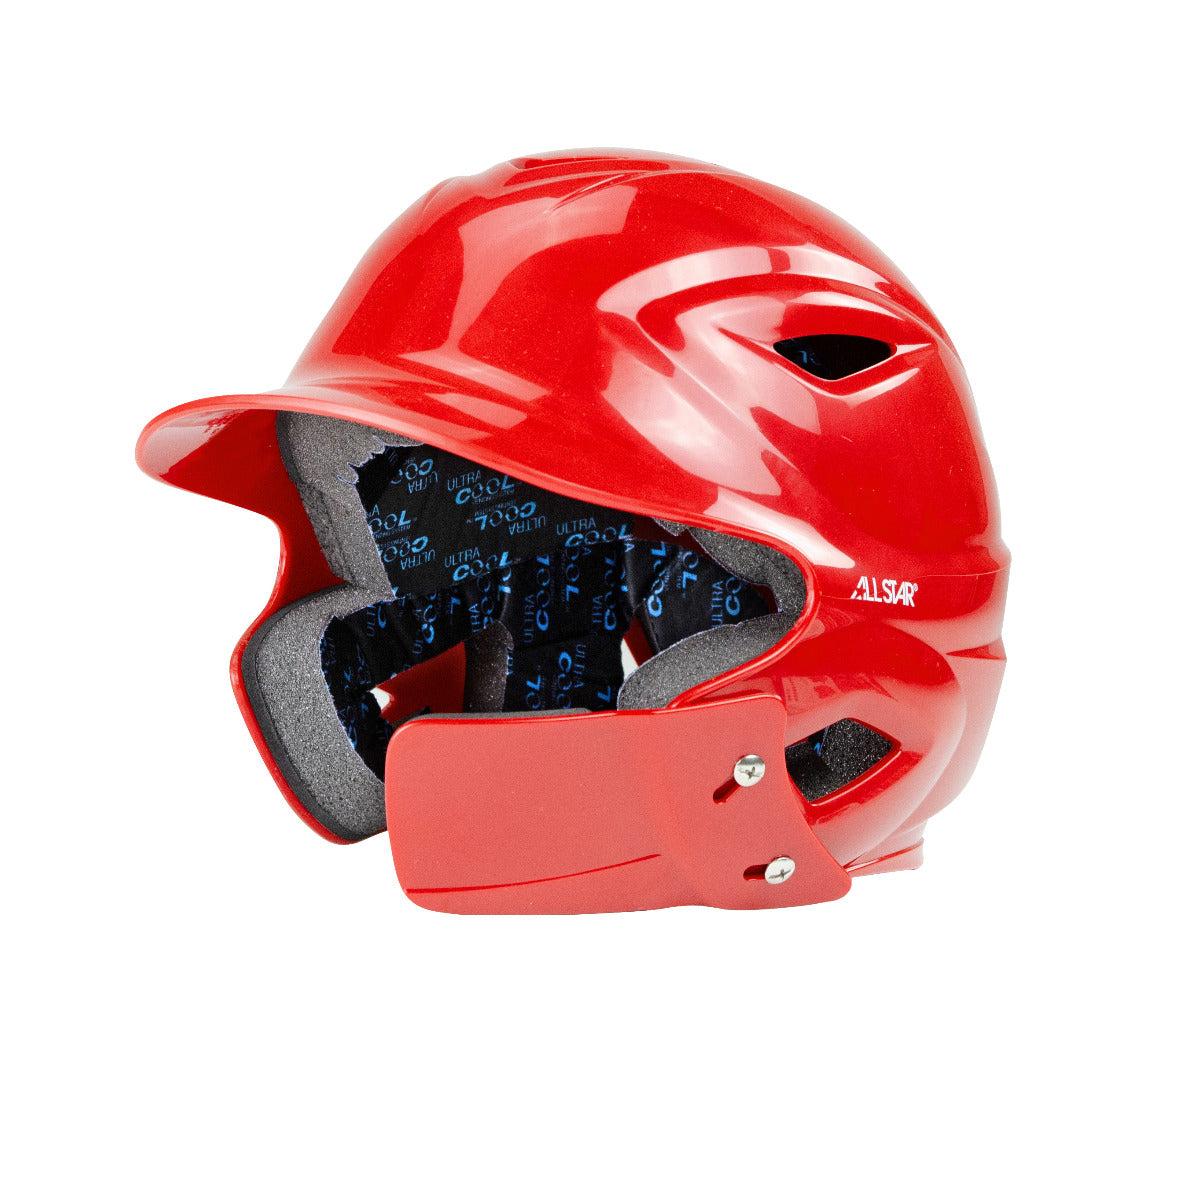 S7™ YOUTH BATTING HELMET W/ATTACHED JAWLINE™